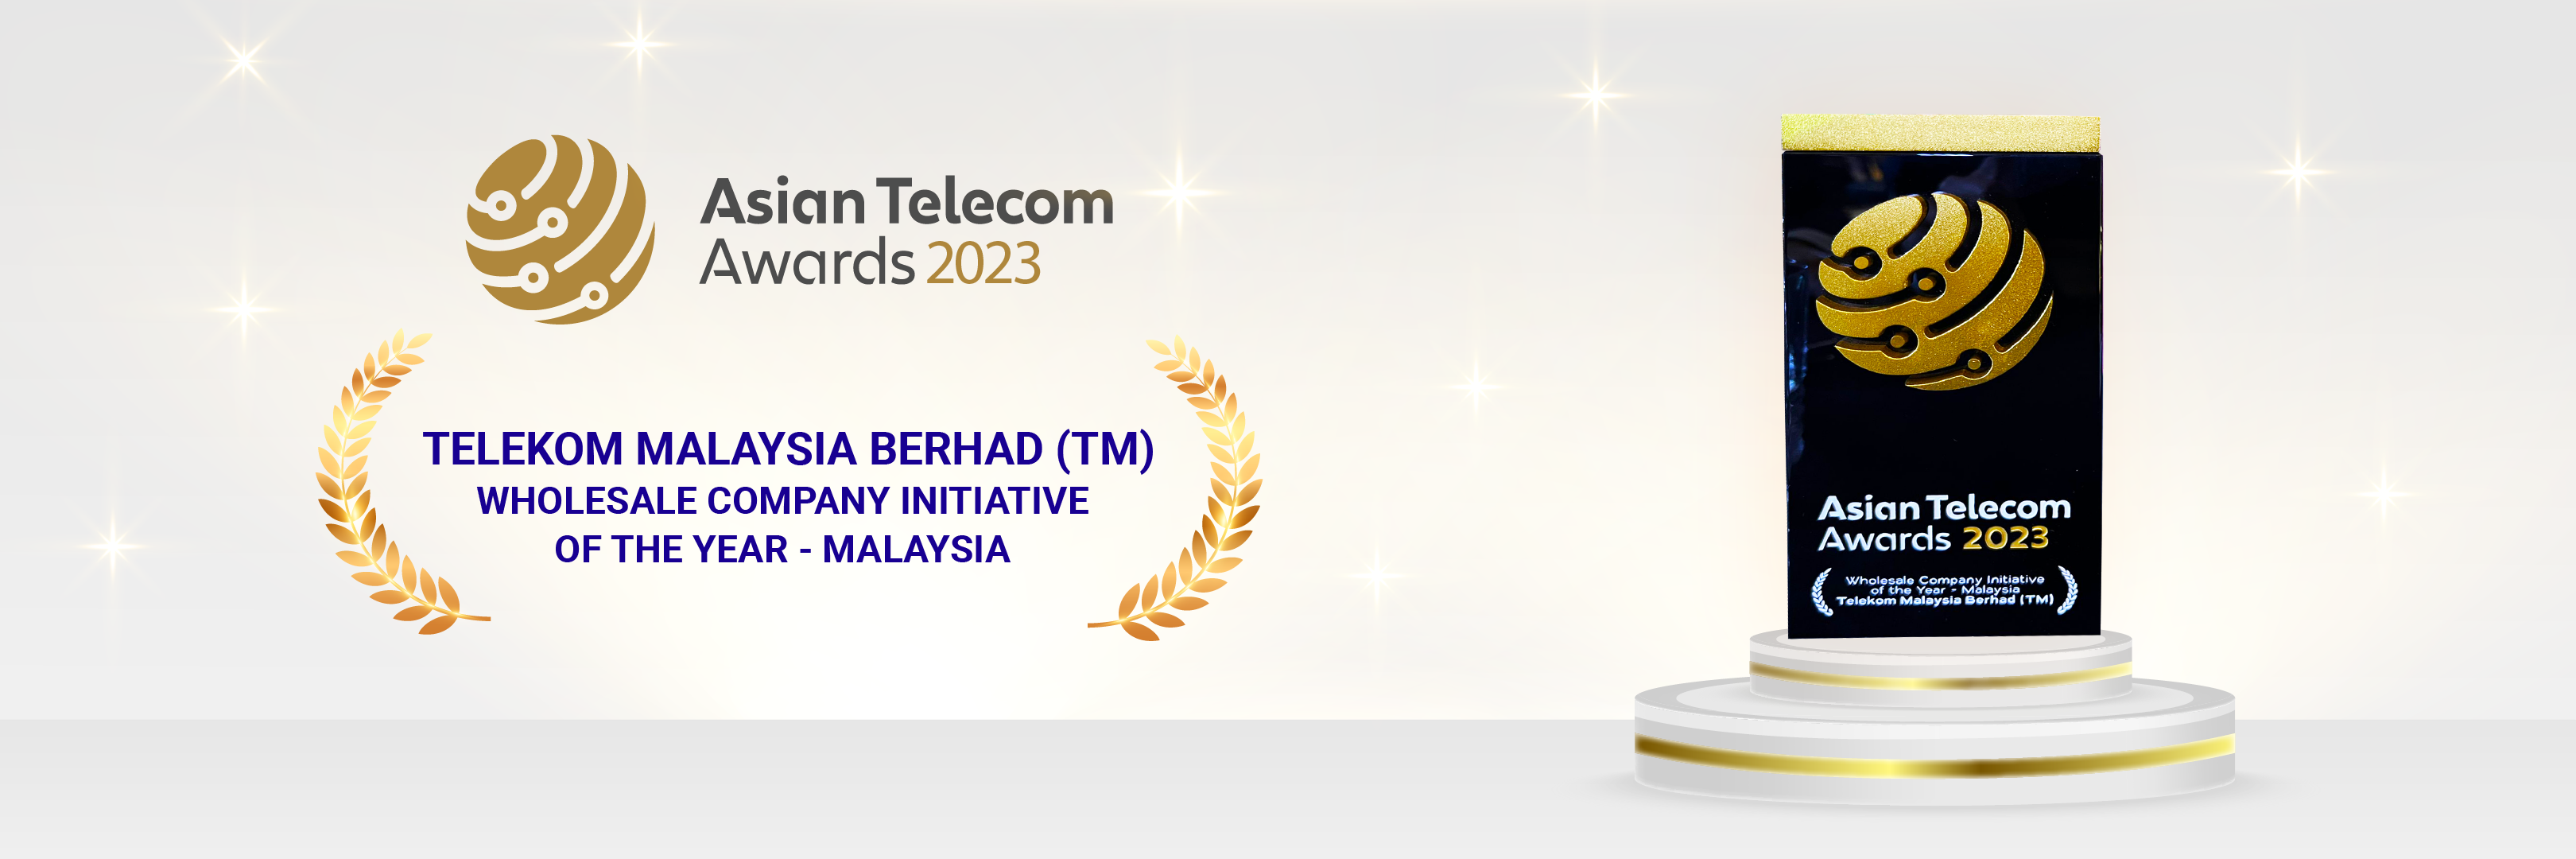 Telekom Malaysia stretches their lead in the country’s wholesale telco